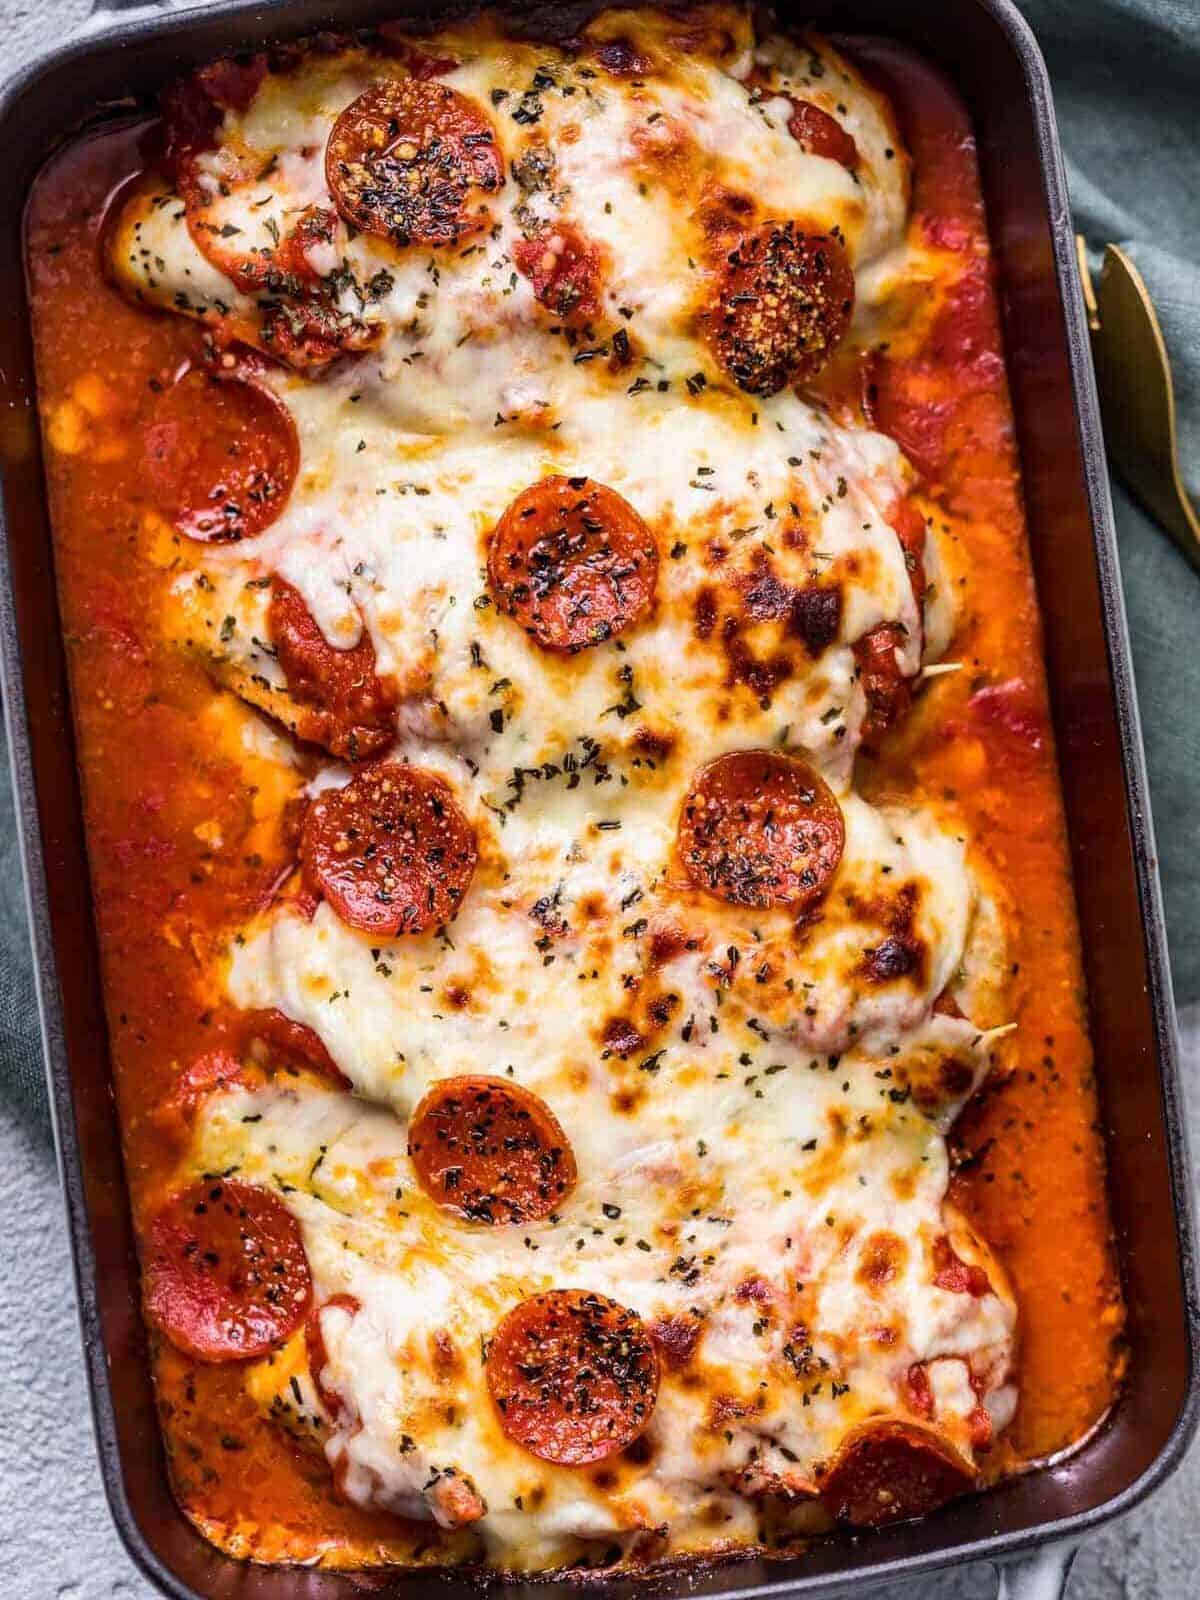 Pizza stuffed chicken bake topped with mozzarella and pepperonis.